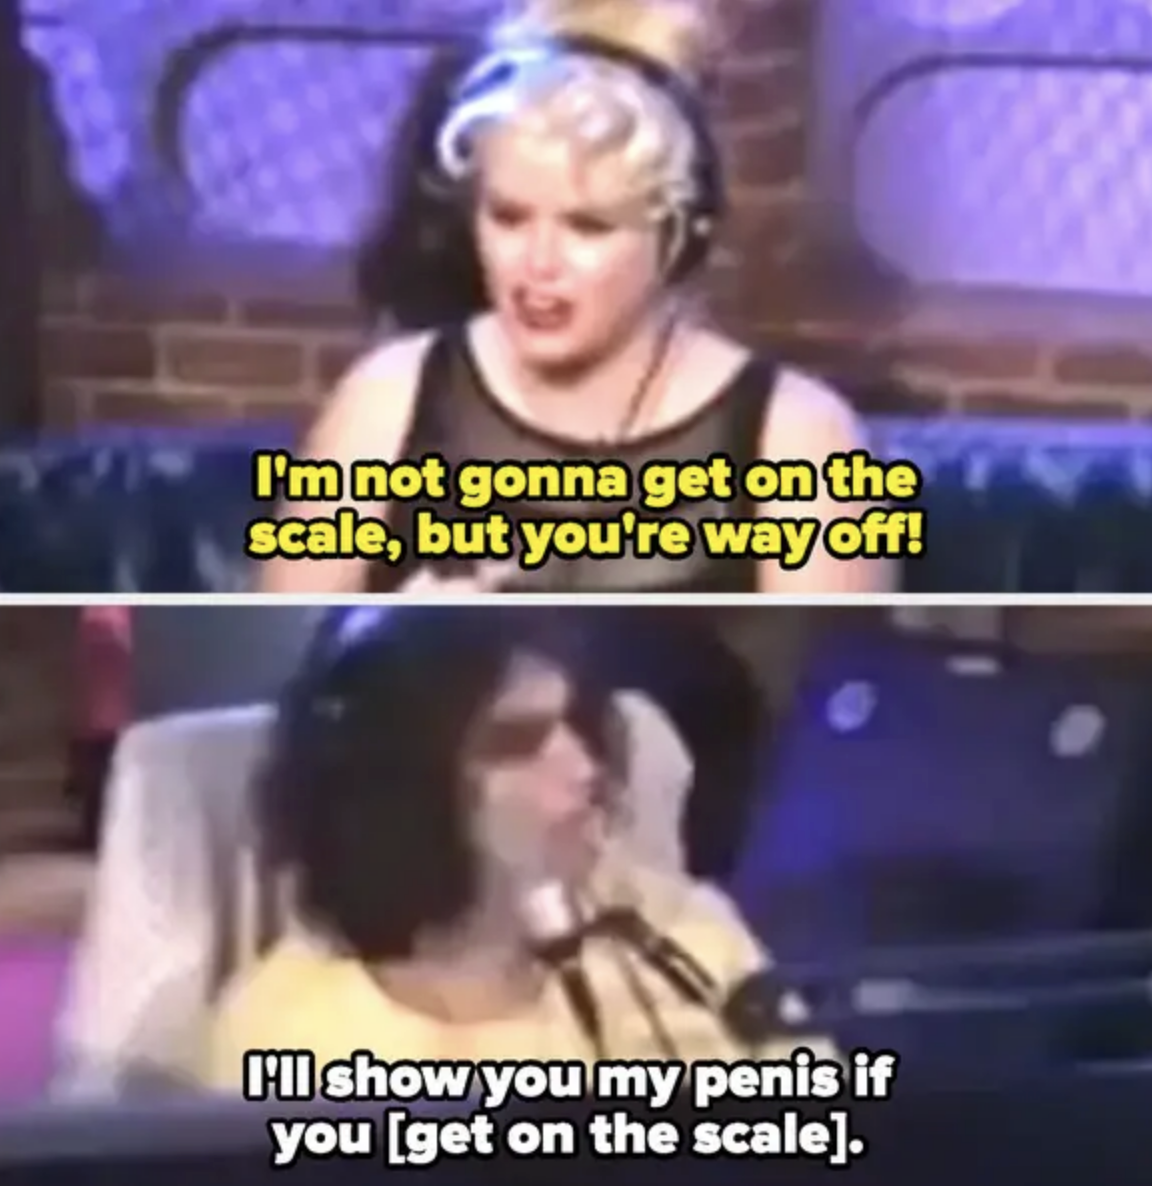 howard saying, i&#x27;ll show you my penis if you get on the scale